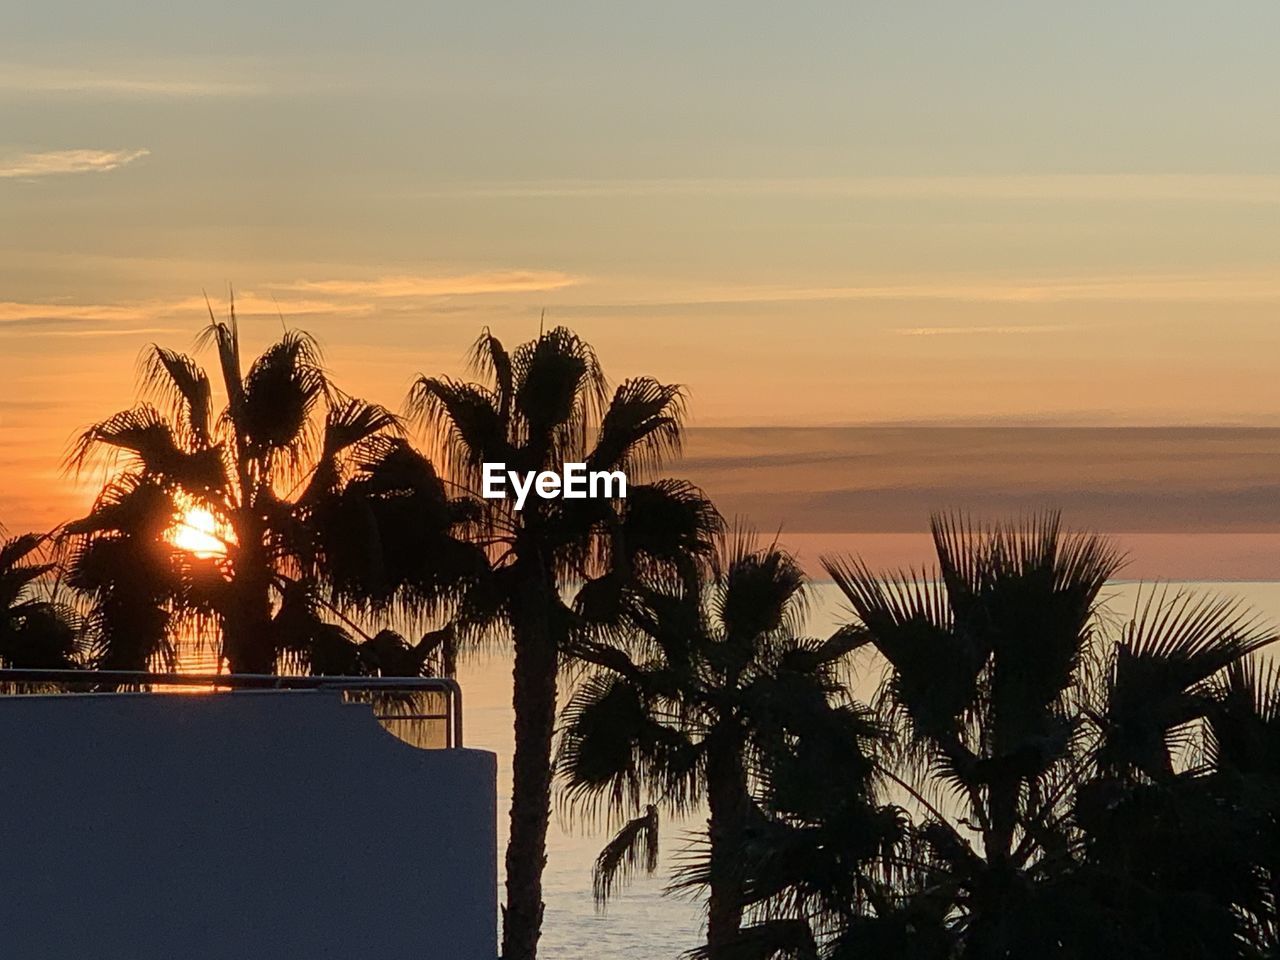 SILHOUETTE PALM TREES AGAINST SEA DURING SUNSET